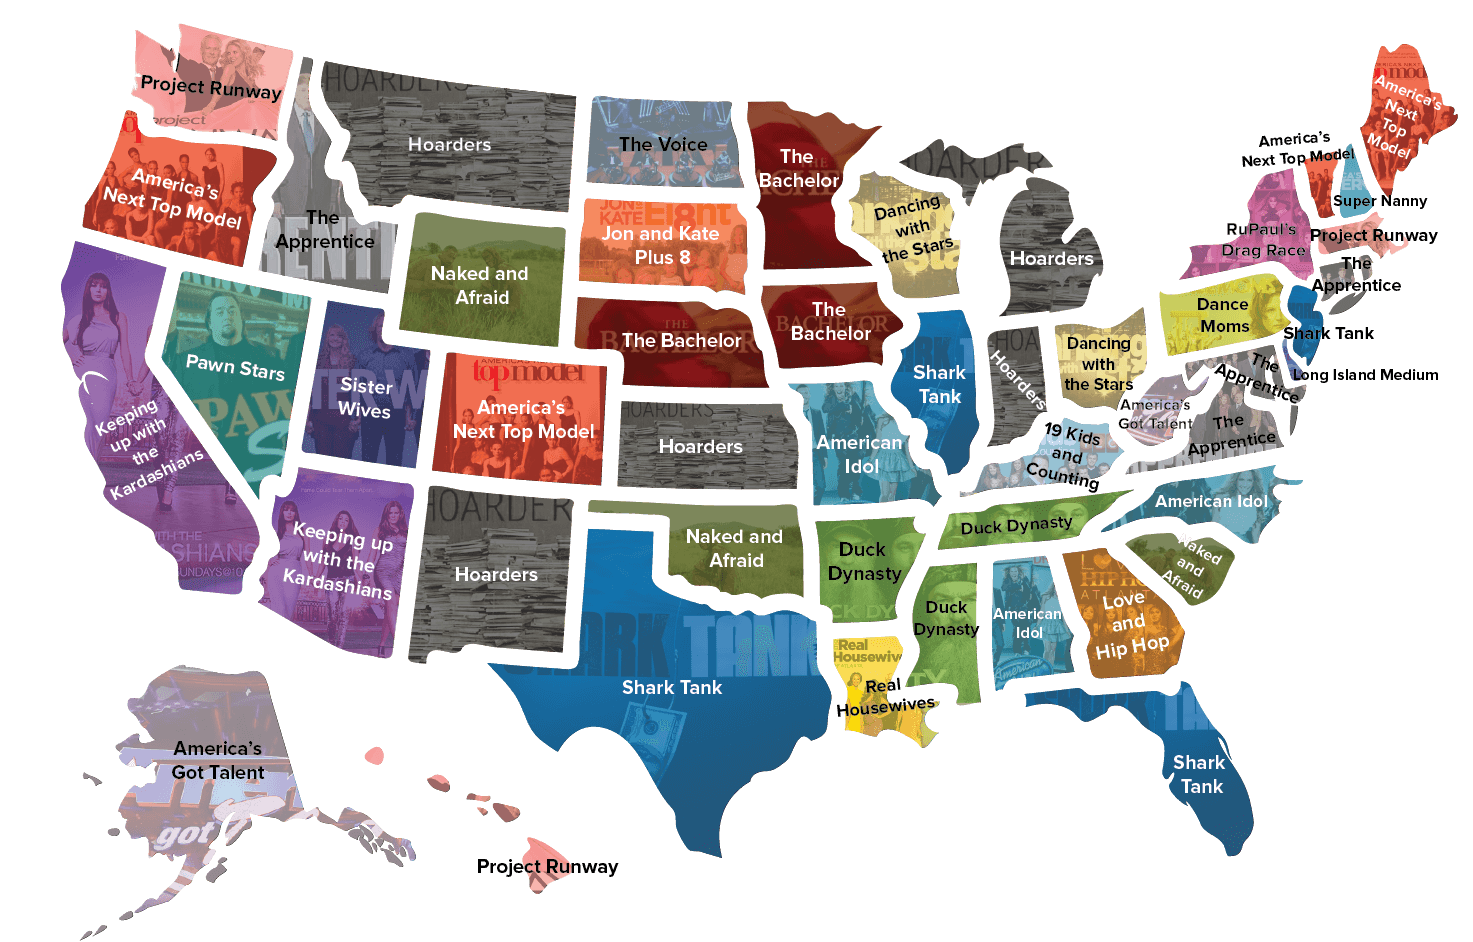 Most popular reality TV show by state